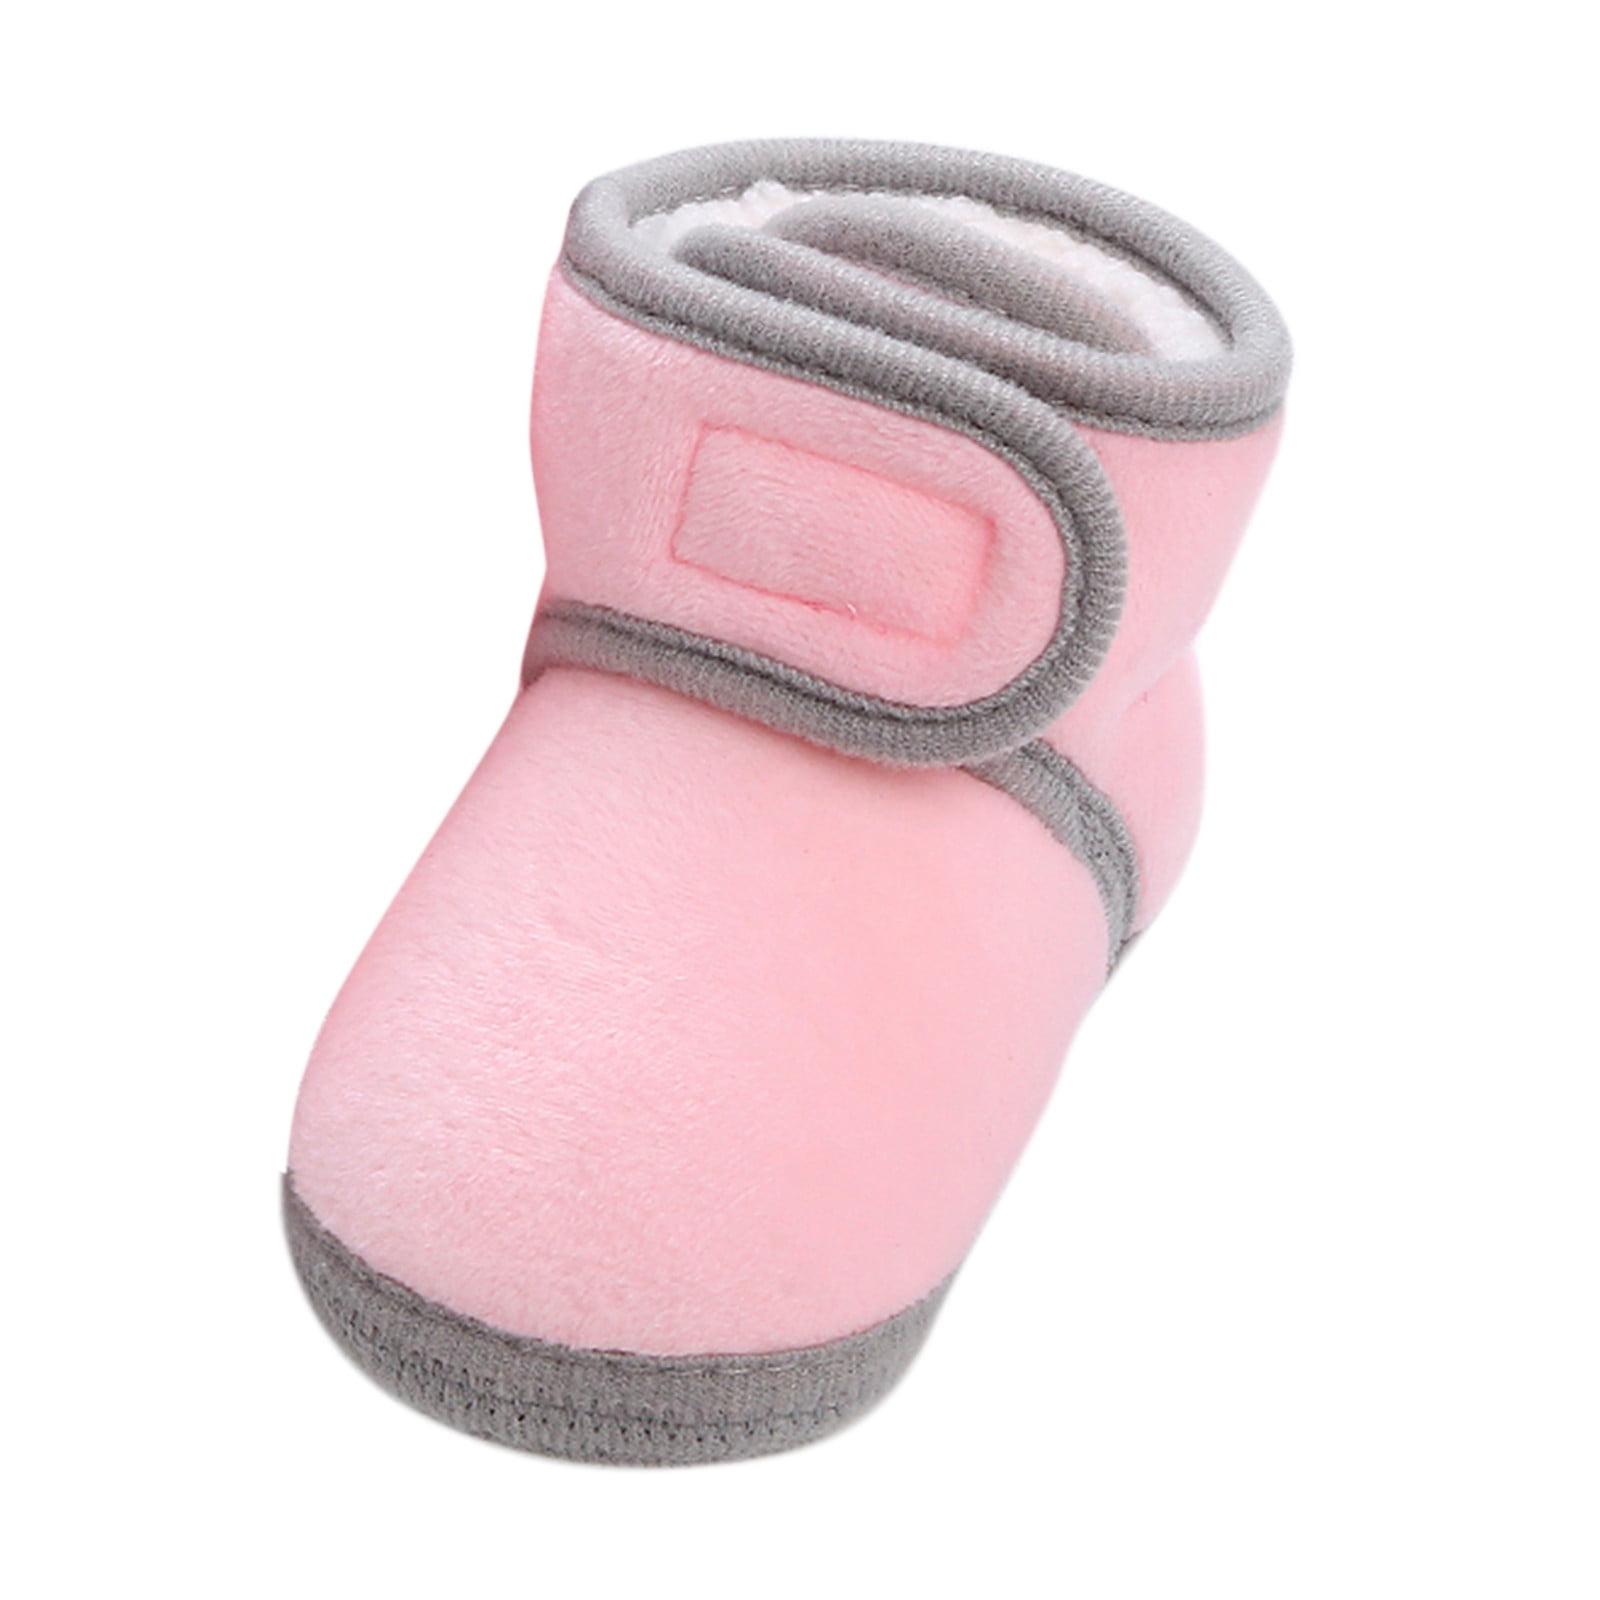 Shoes for 1 Year Old Boy Shoes Girl Baby Shoes Warm Booties Shoes ...